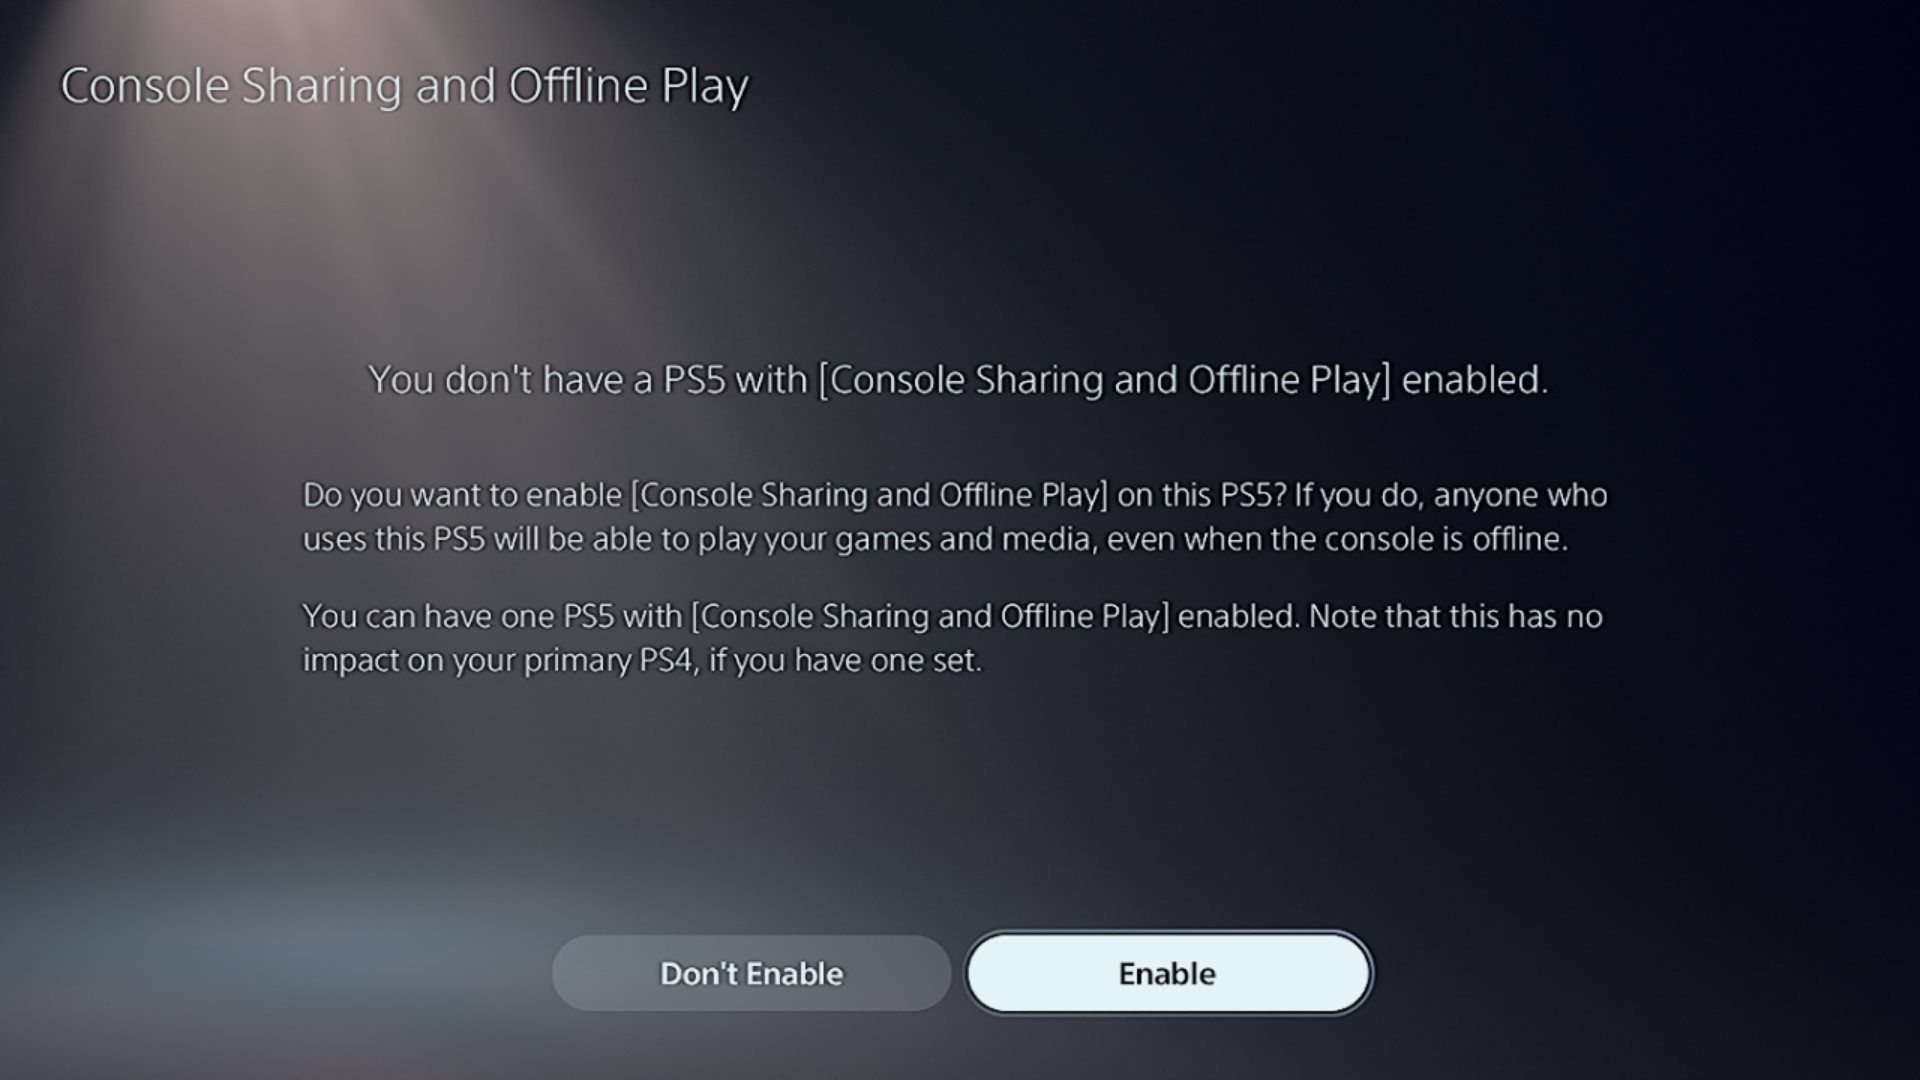 enabling game sharing on PS5